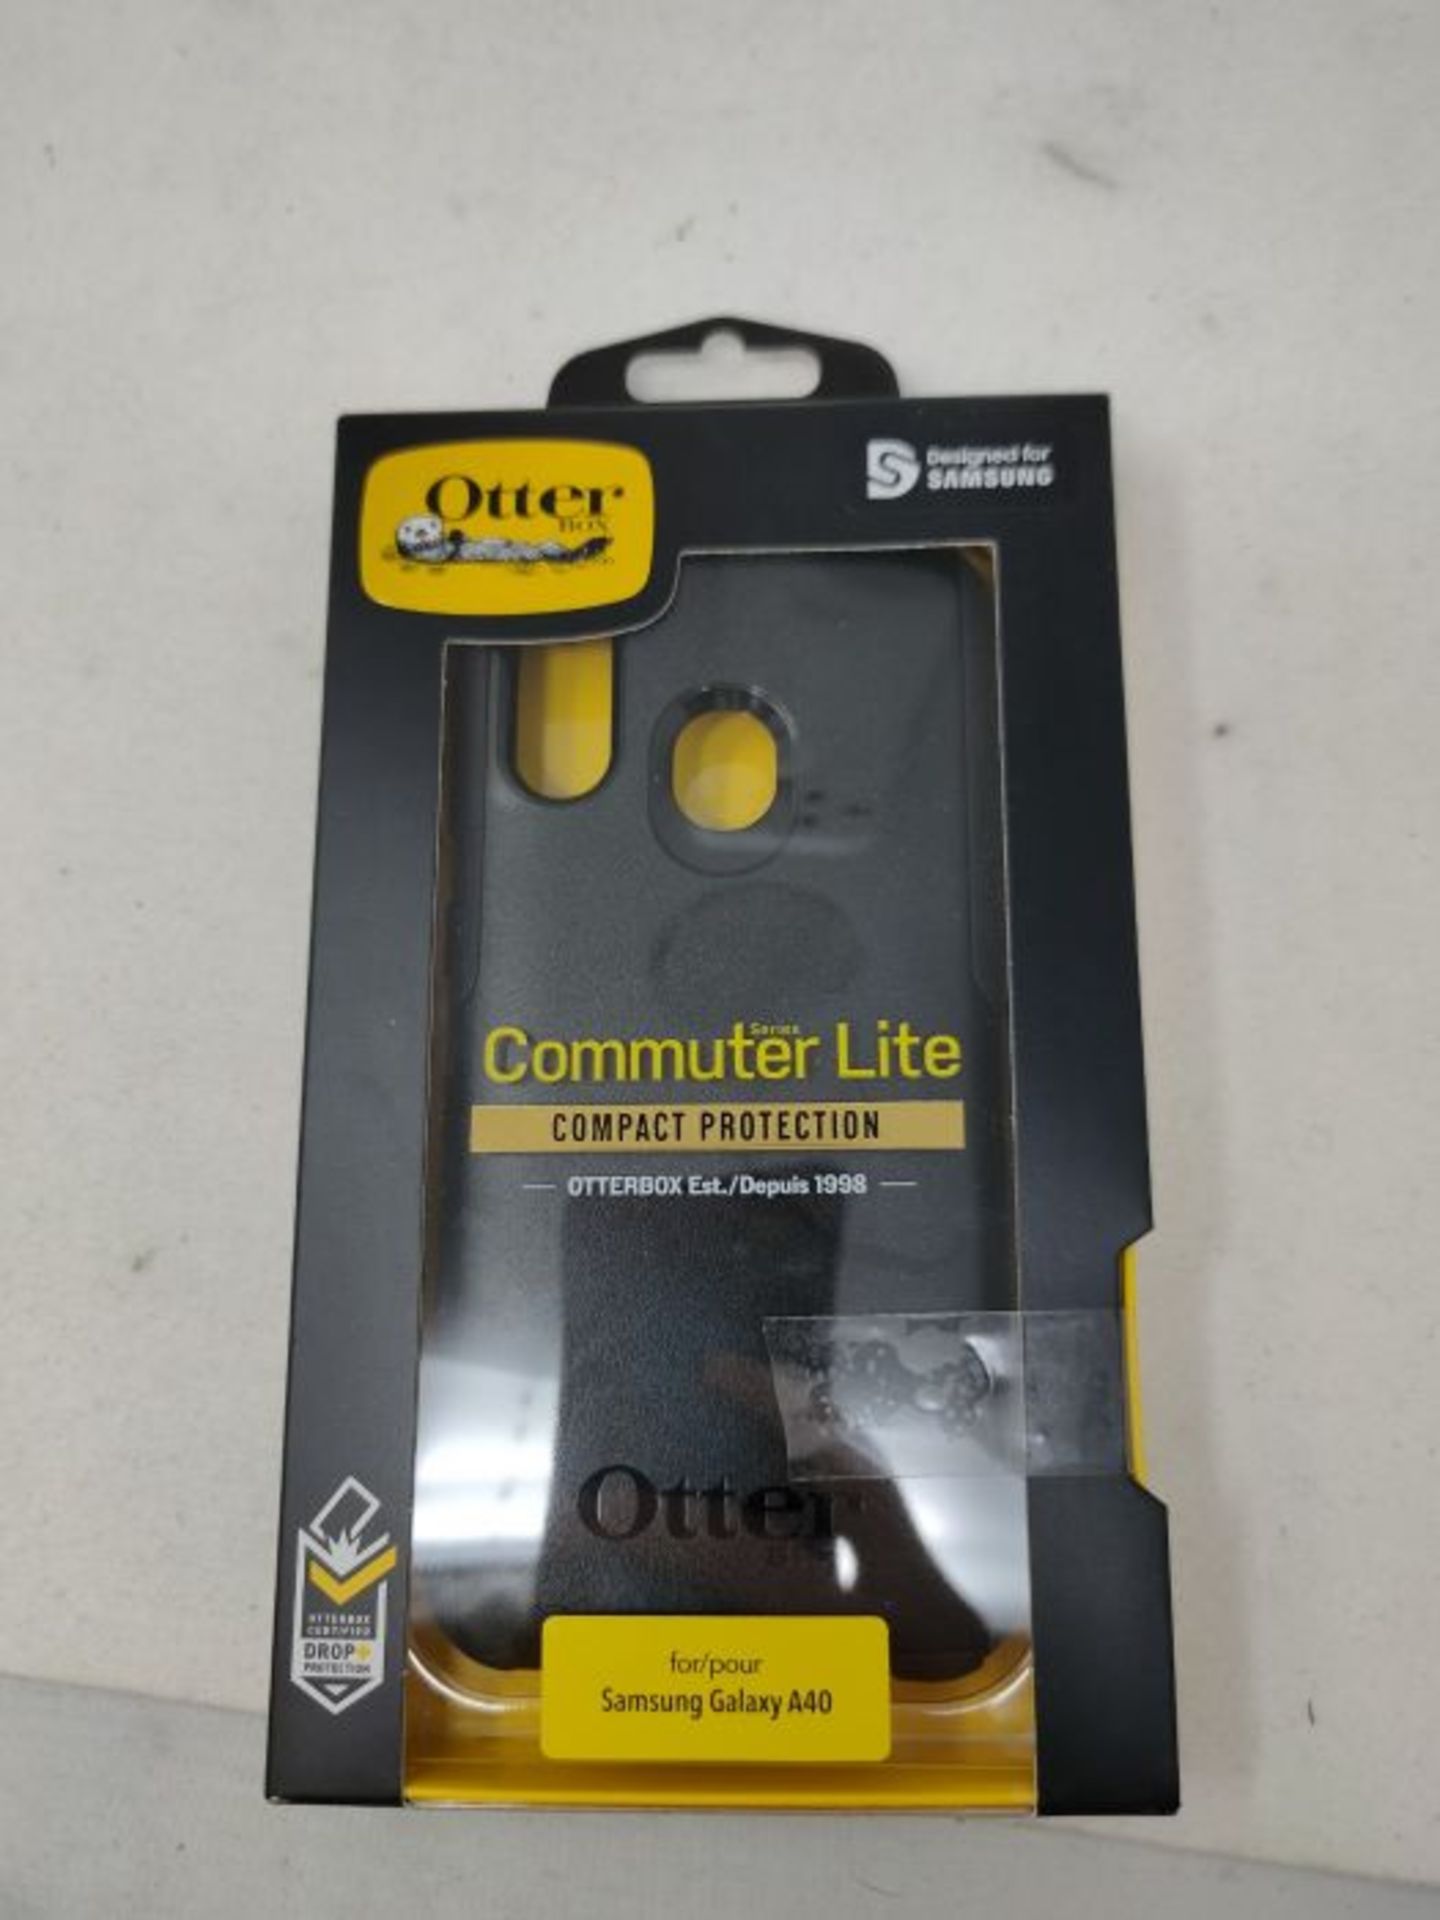 OtterBox 77-62437 for Galaxy A40, Drop Proof Protective Case, Commuter Lite, Black - Image 2 of 3